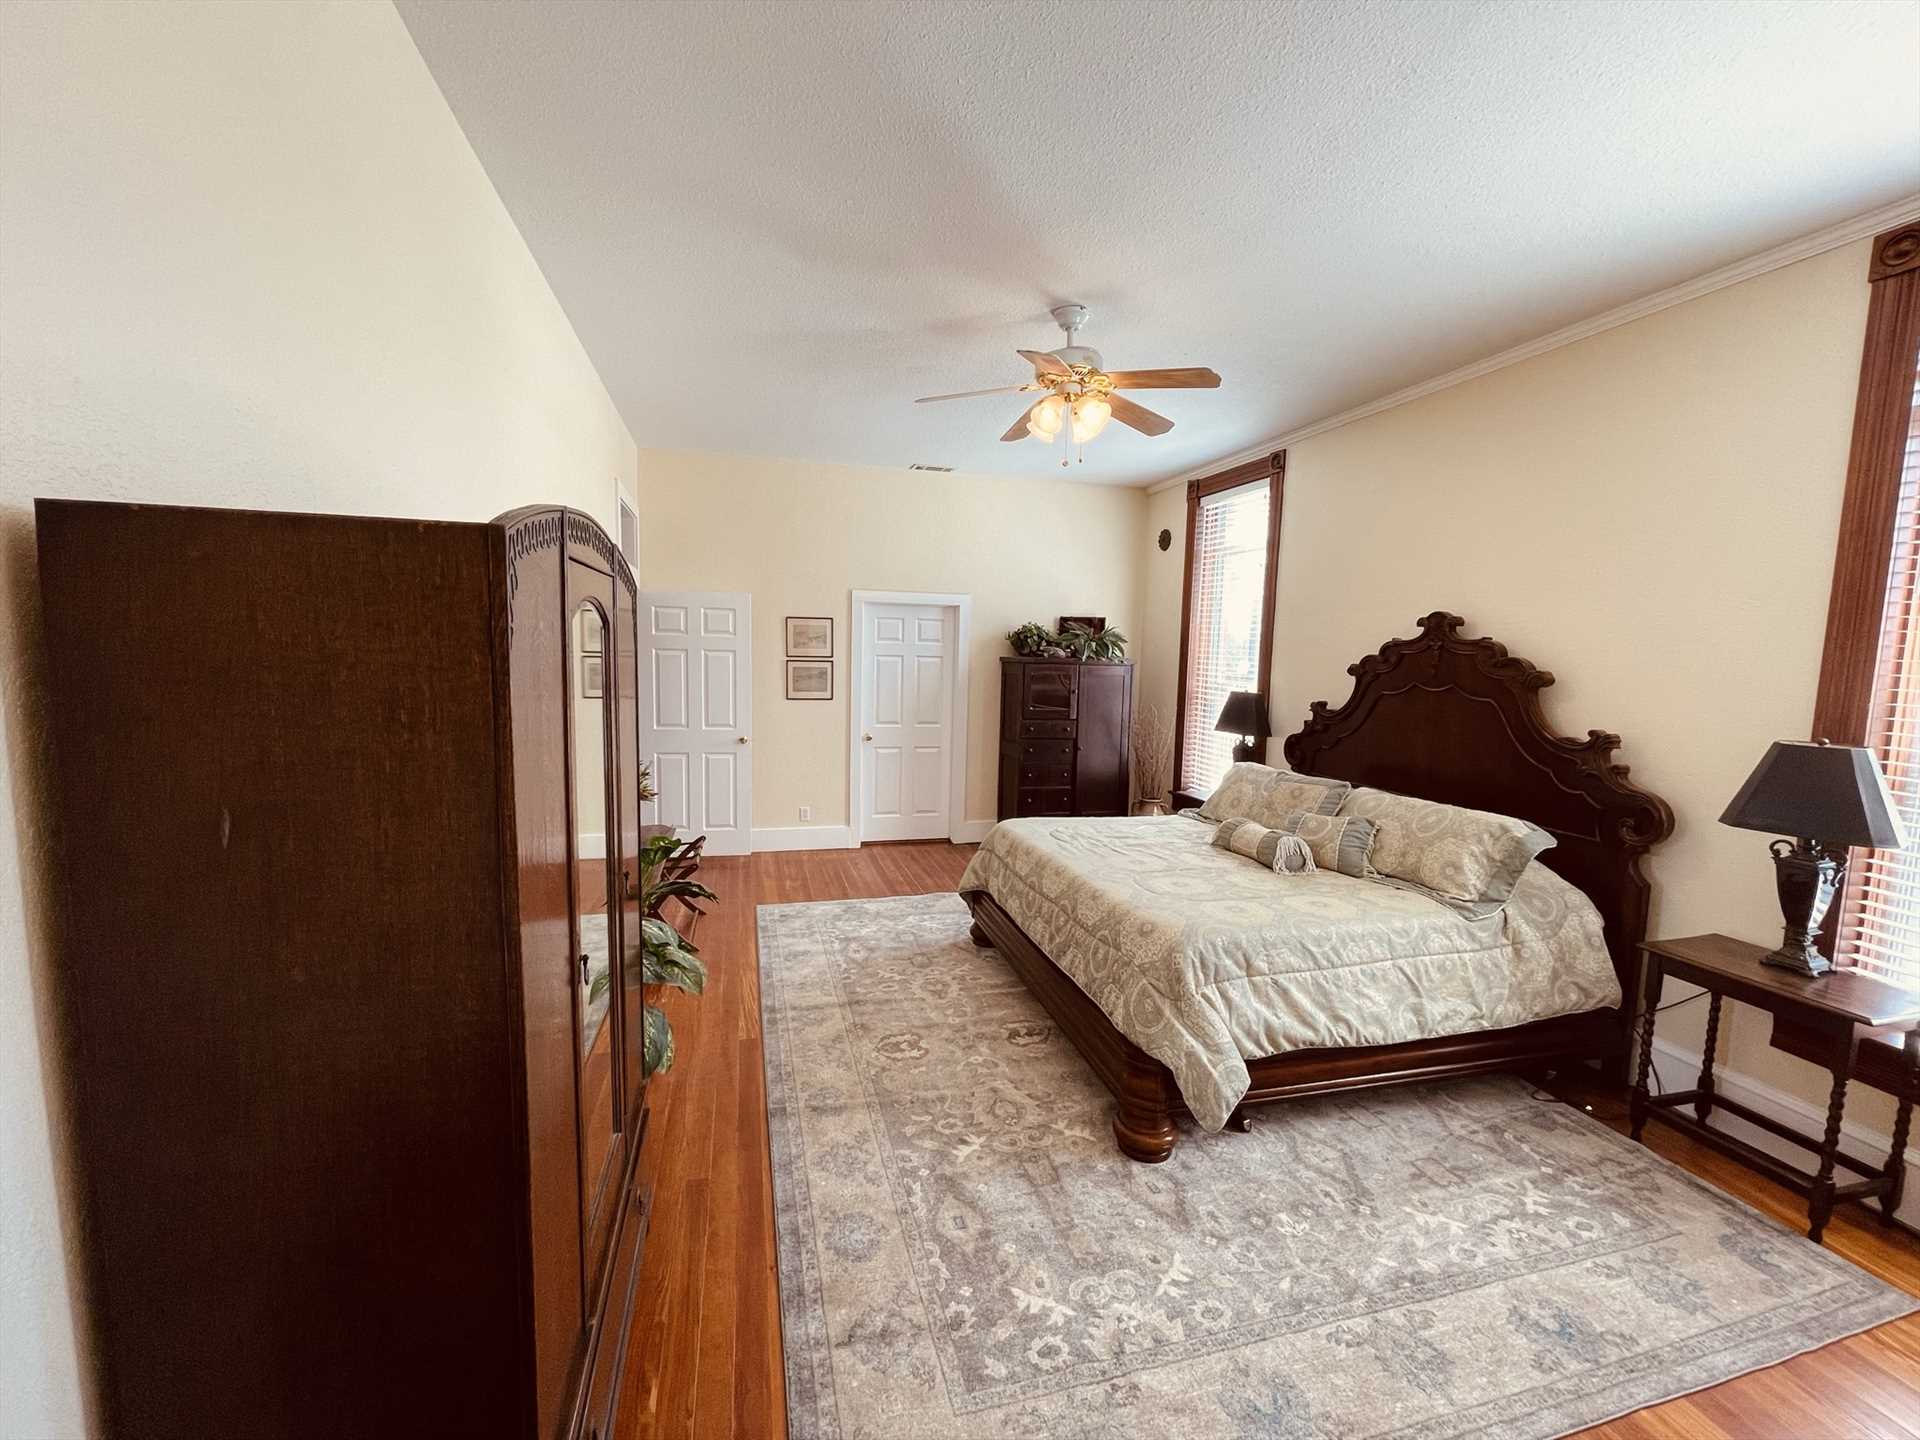                                                 Six beds in four bedrooms assure private and restful sleep for everyone you bring along.